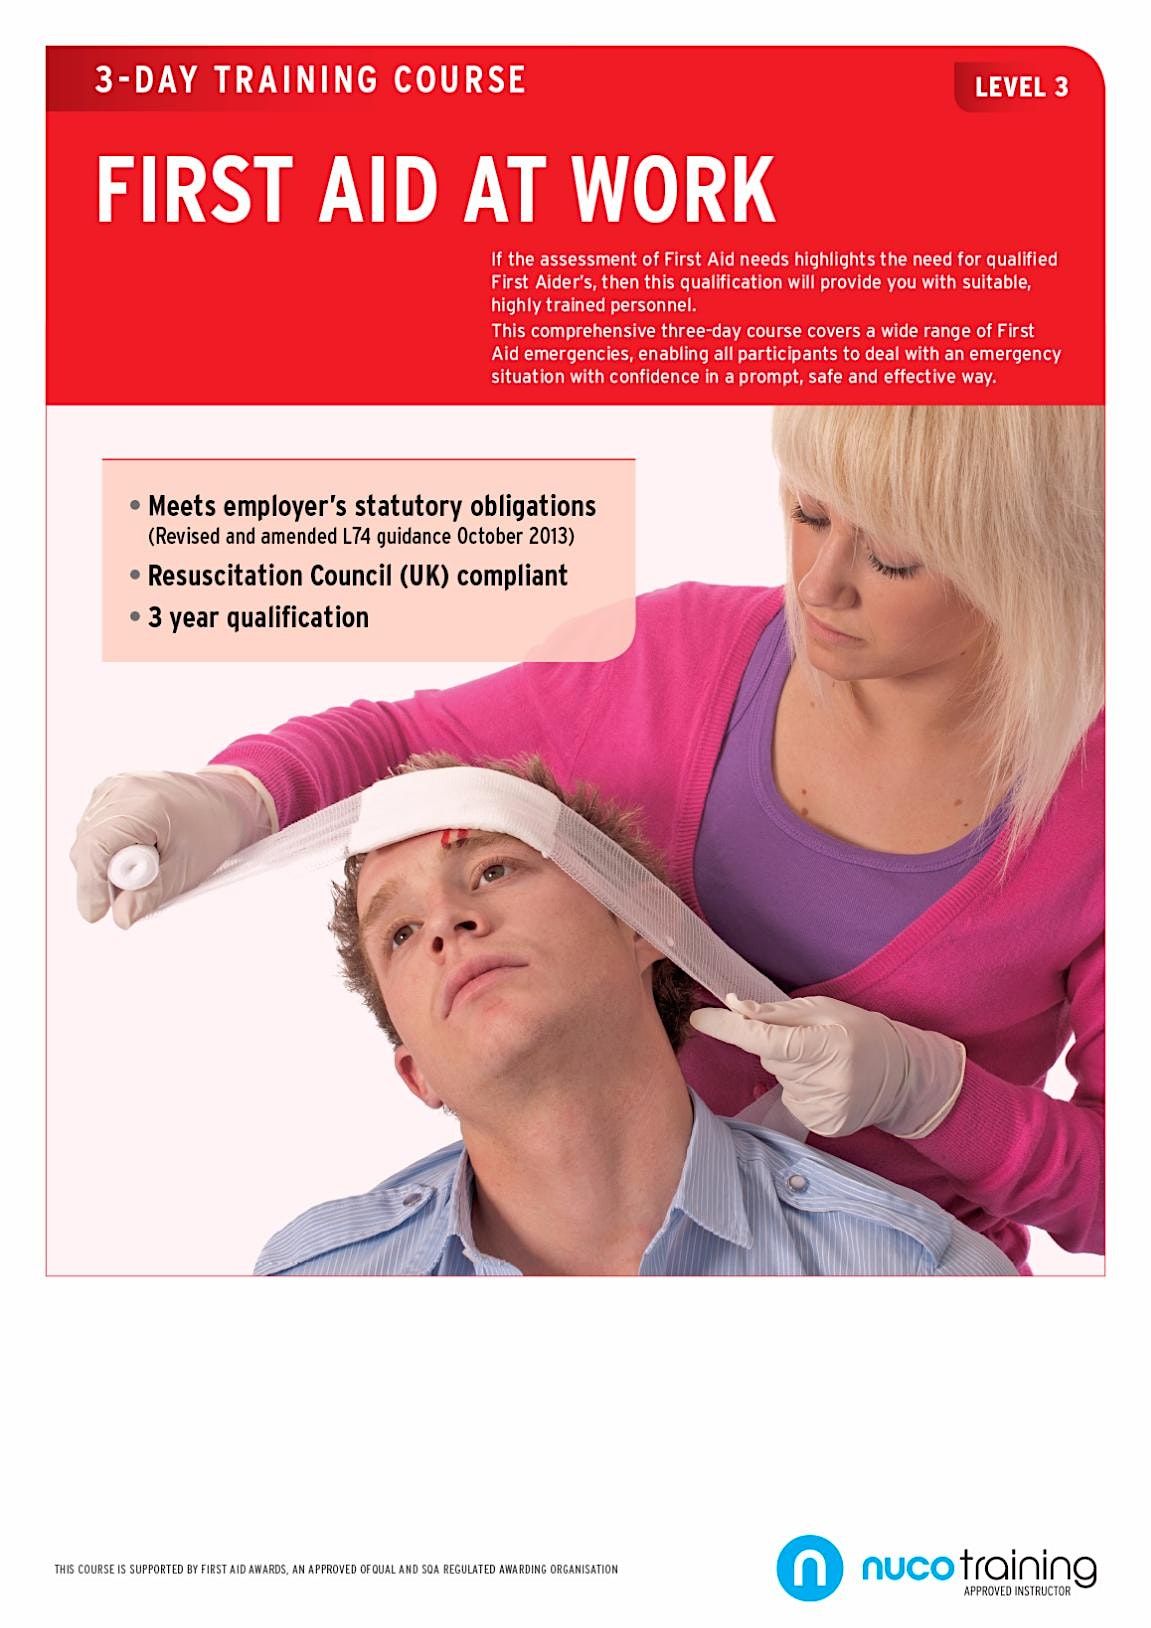 Level 3 First Aid at Work Course Re qualification